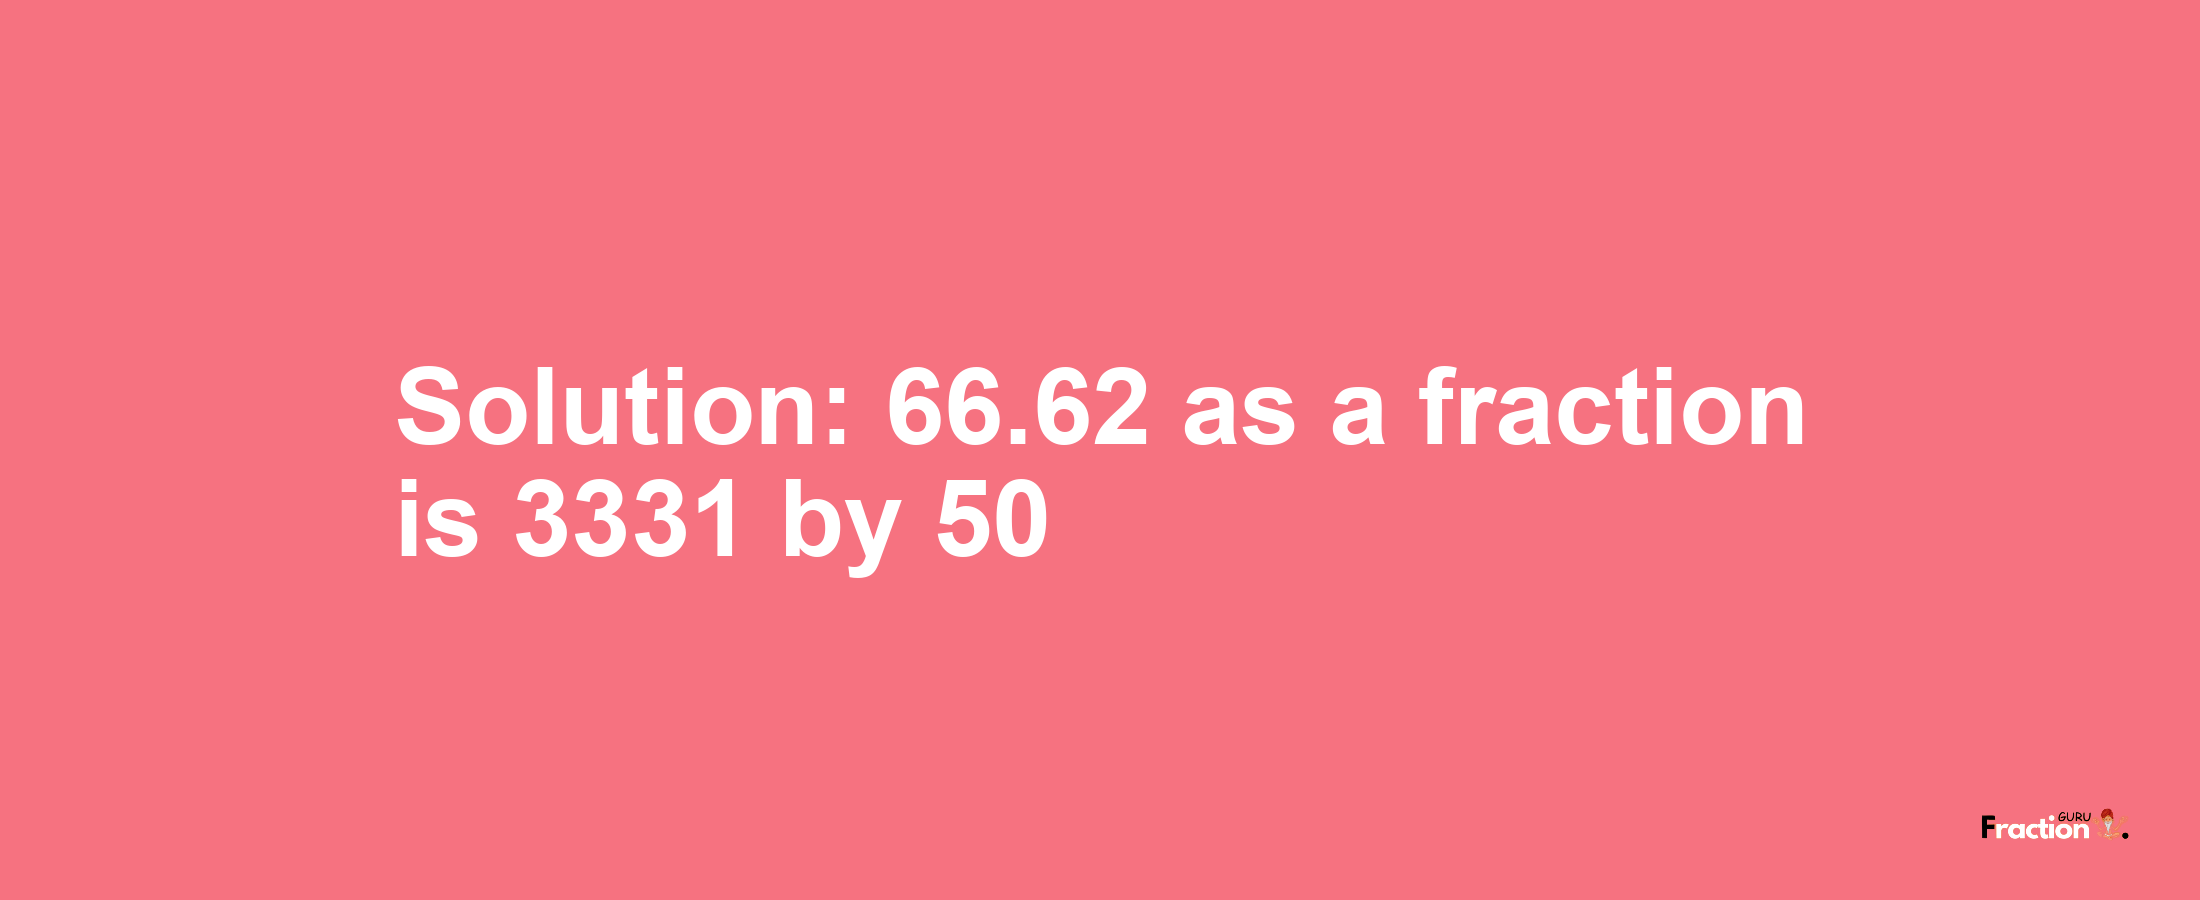 Solution:66.62 as a fraction is 3331/50